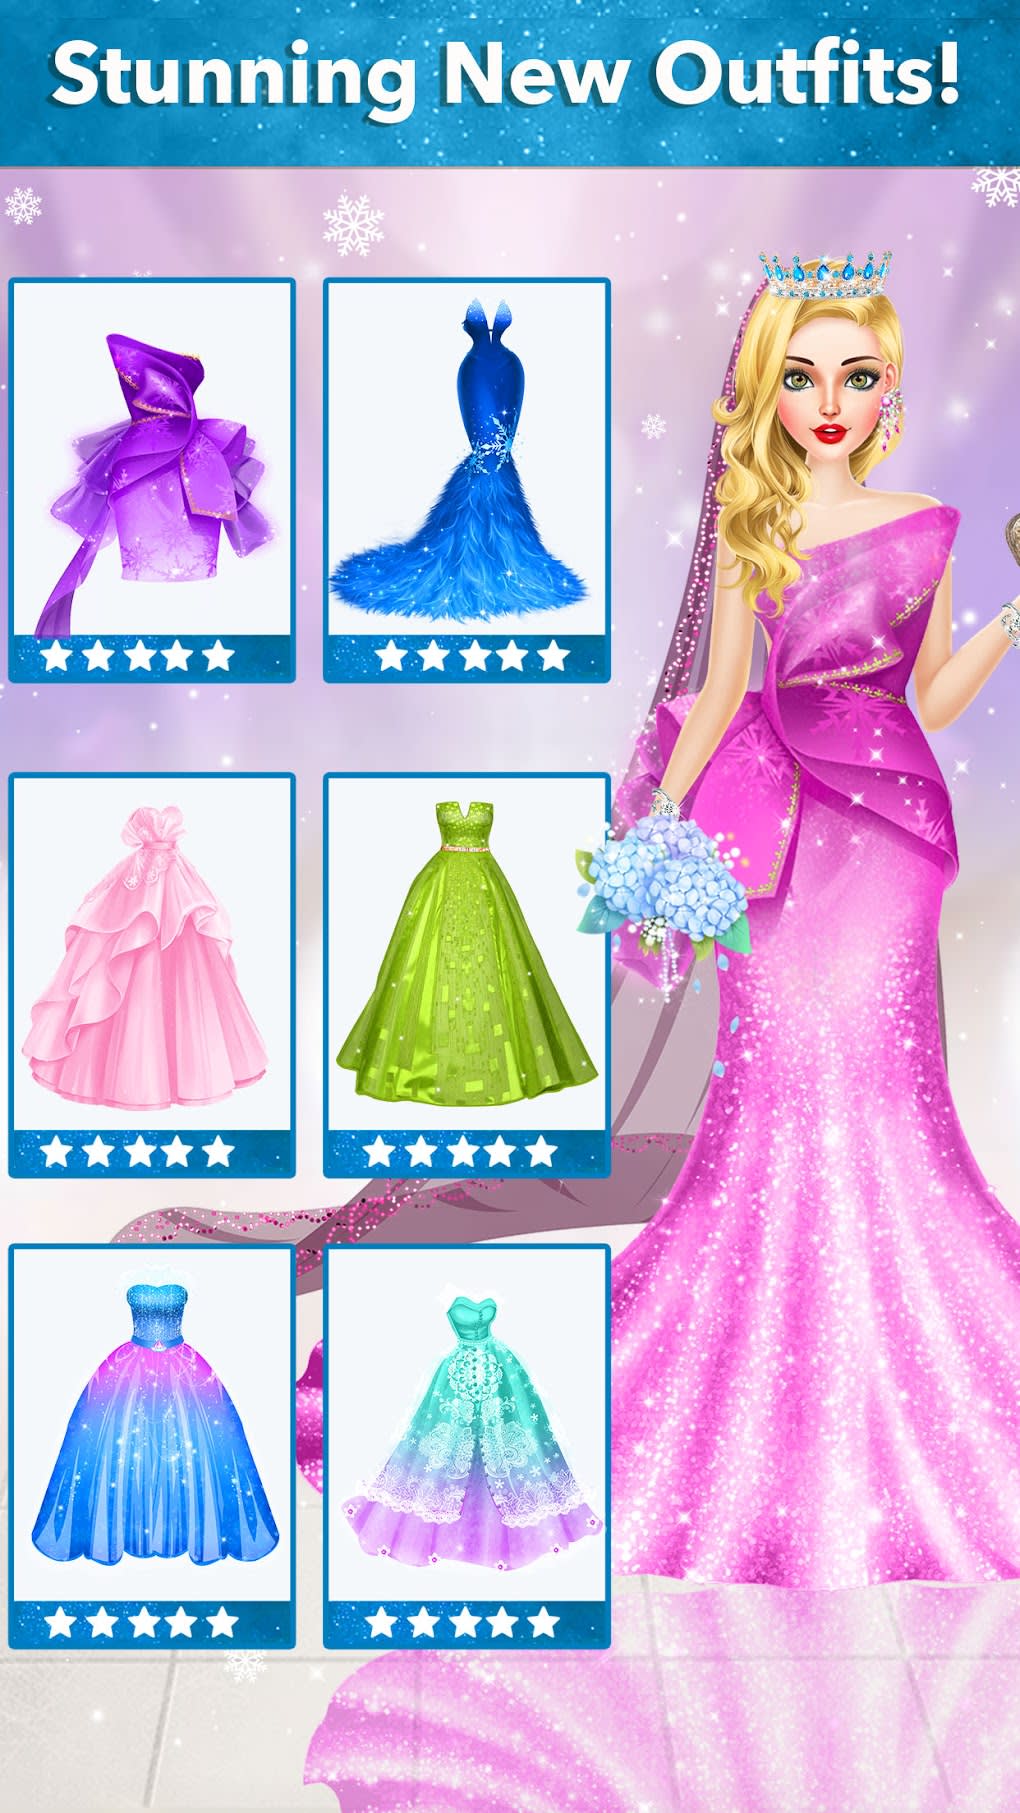 Fashion Games For Girls, Beauty Makeover Games, Dress Up Games For Kids,  Spa Salon Games, Free Makeup Games, Fashion Girls Games  2D:Amazon.in:Appstore for Android